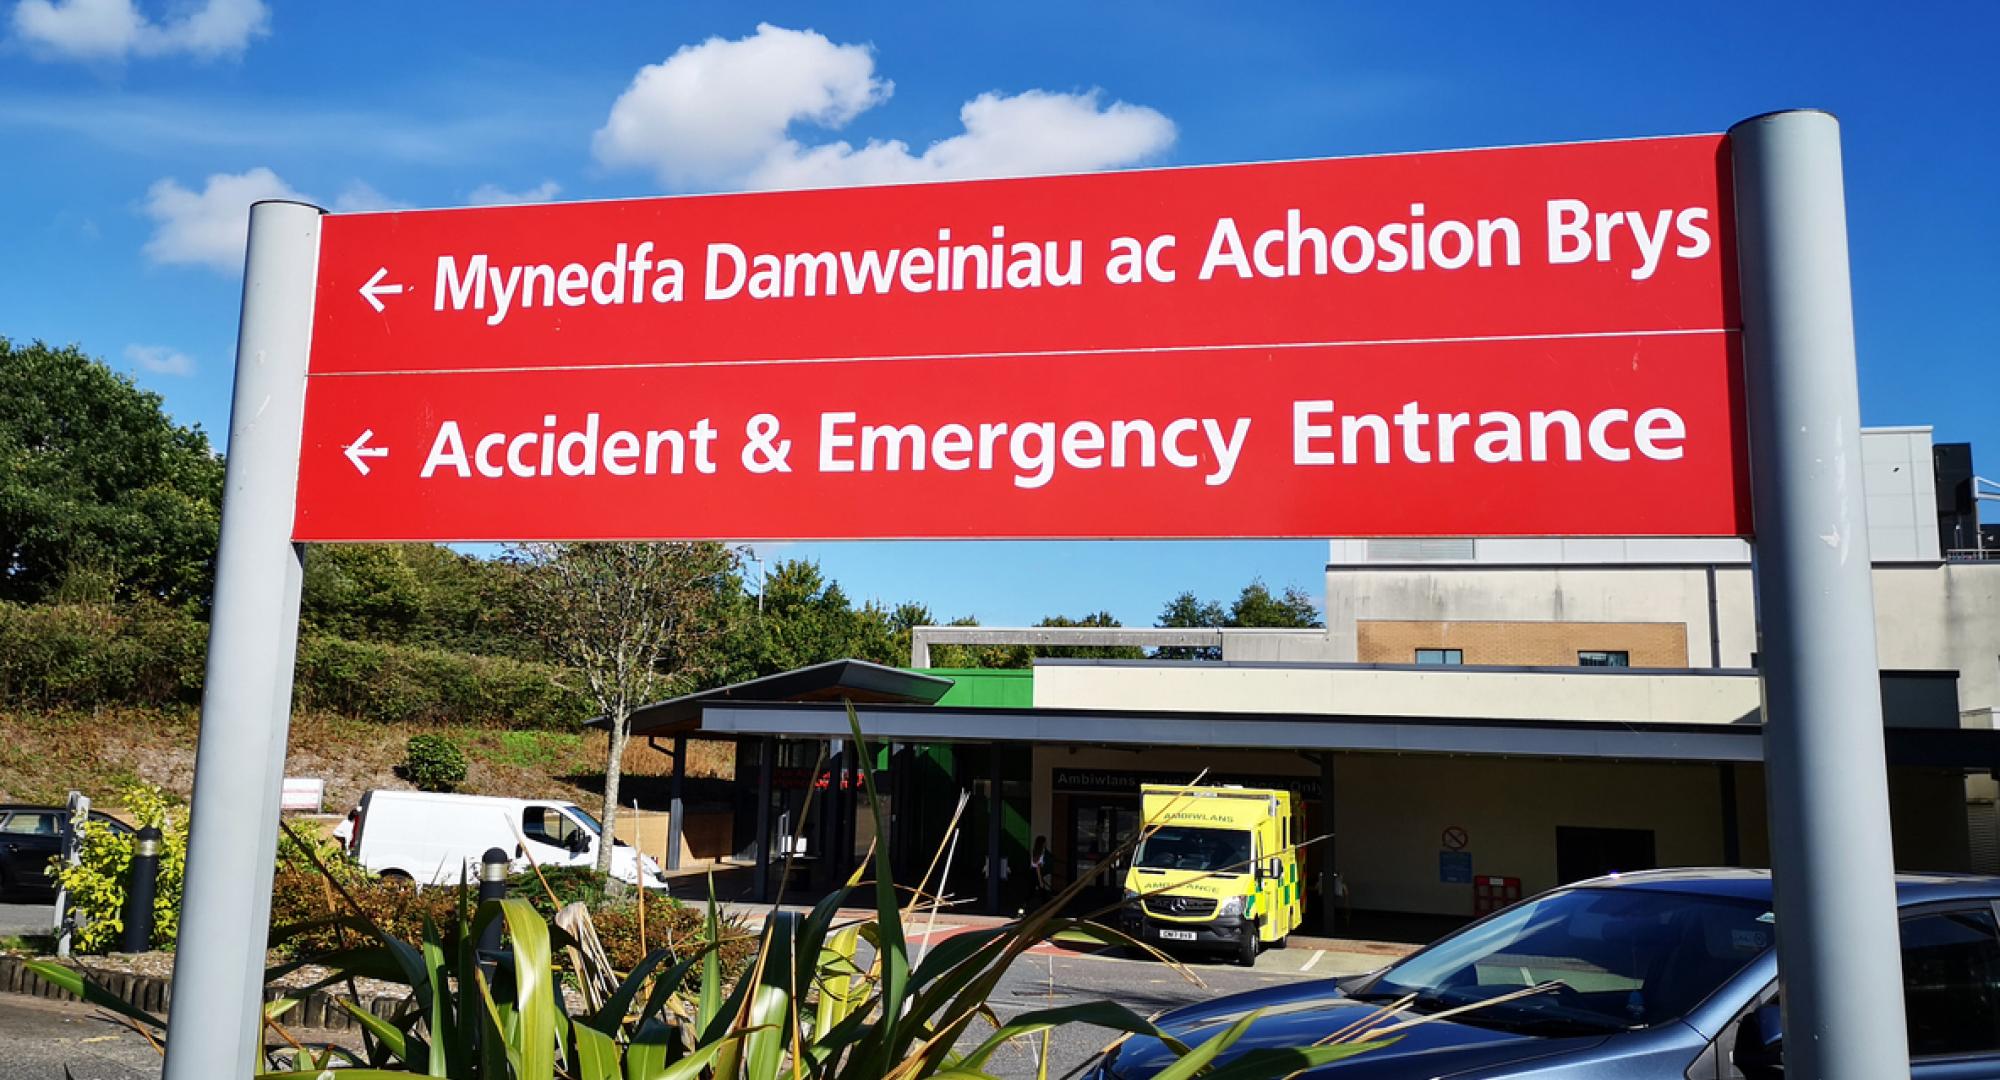 Accident and emergency sign in Wales